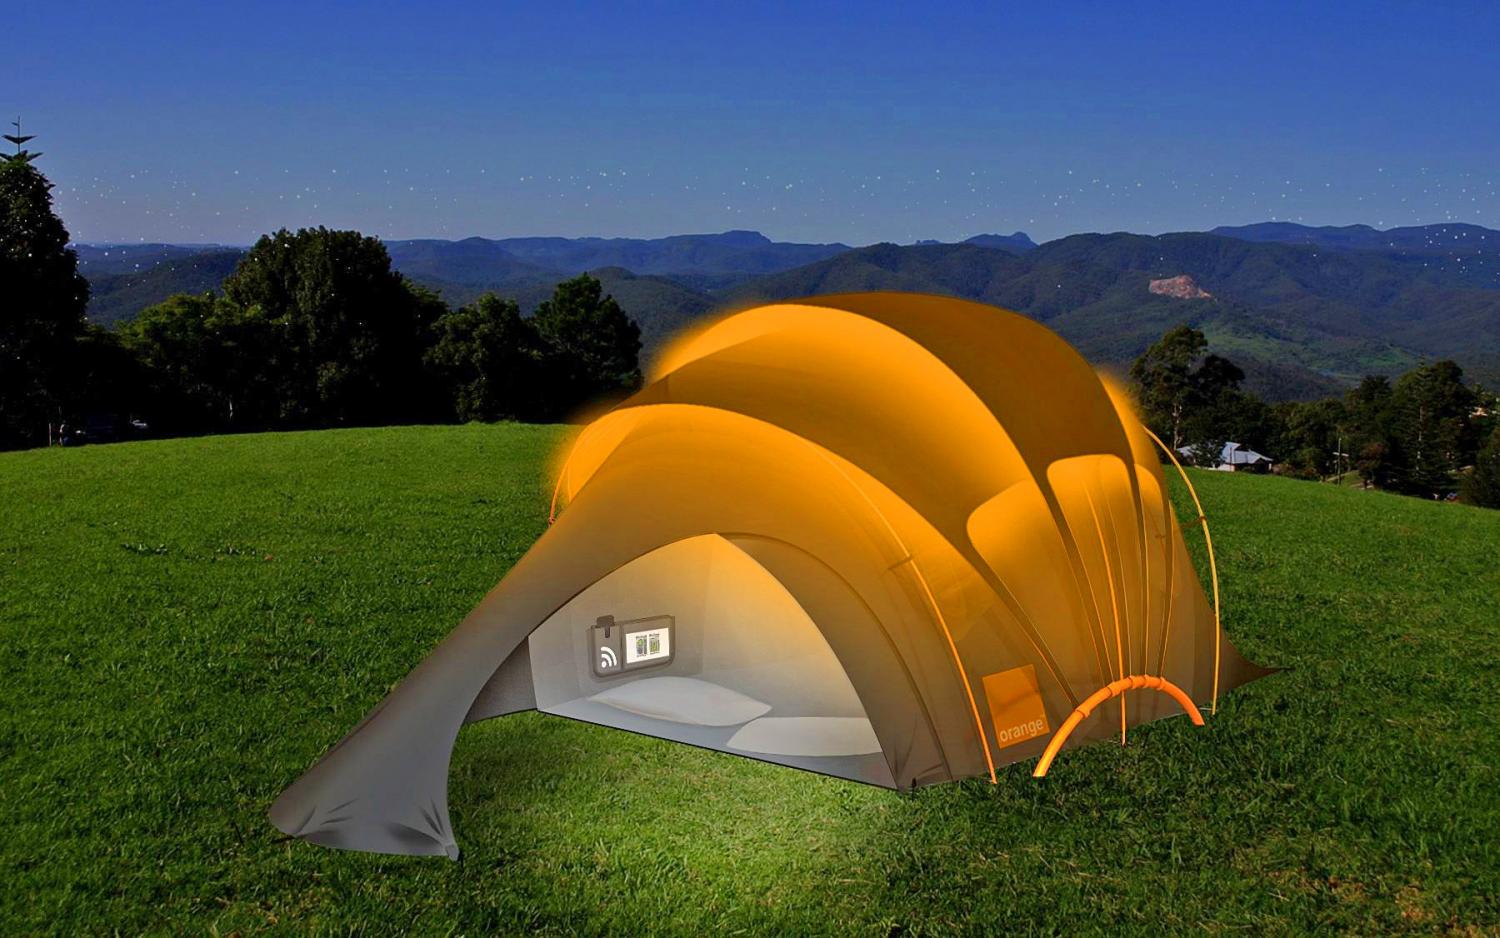 Solar Tent With Heated Floors - Chill n Charge Solar Tent From Orange and Kaleidoscope Design